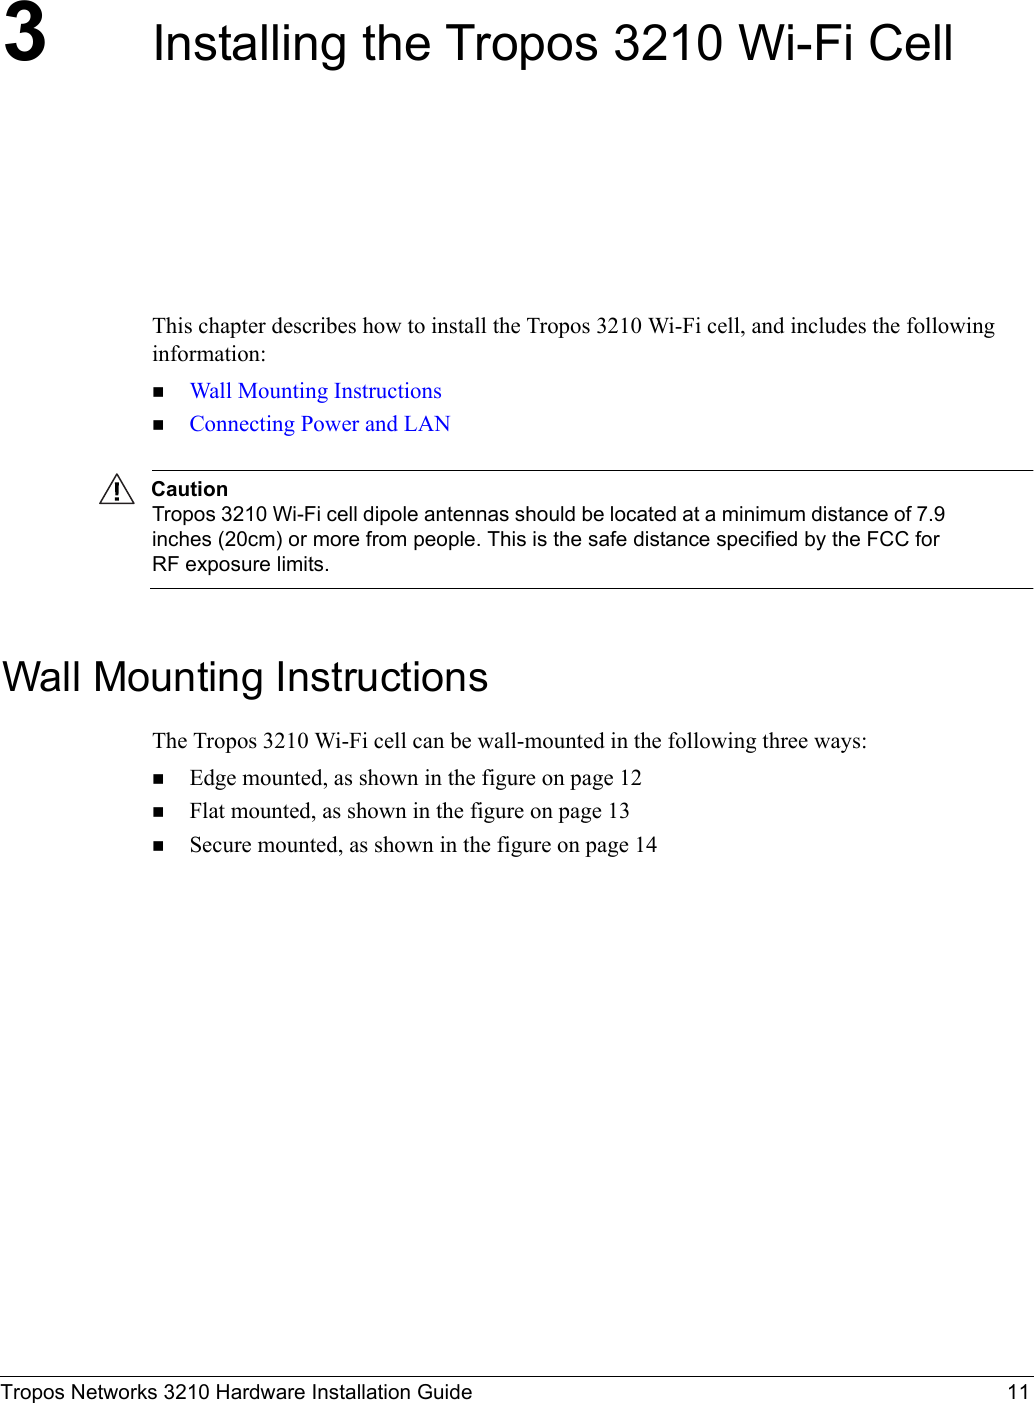 Tropos Networks 3210 Hardware Installation Guide 113Installing the Tropos 3210 Wi-Fi CellThis chapter describes how to install the Tropos 3210 Wi-Fi cell, and includes the following information:Wall Mounting InstructionsConnecting Power and LANCautionTropos 3210 Wi-Fi cell dipole antennas should be located at a minimum distance of 7.9 inches (20cm) or more from people. This is the safe distance specified by the FCC for RF exposure limits.Wall Mounting InstructionsThe Tropos 3210 Wi-Fi cell can be wall-mounted in the following three ways:Edge mounted, as shown in the figure on page 12Flat mounted, as shown in the figure on page 13Secure mounted, as shown in the figure on page 14